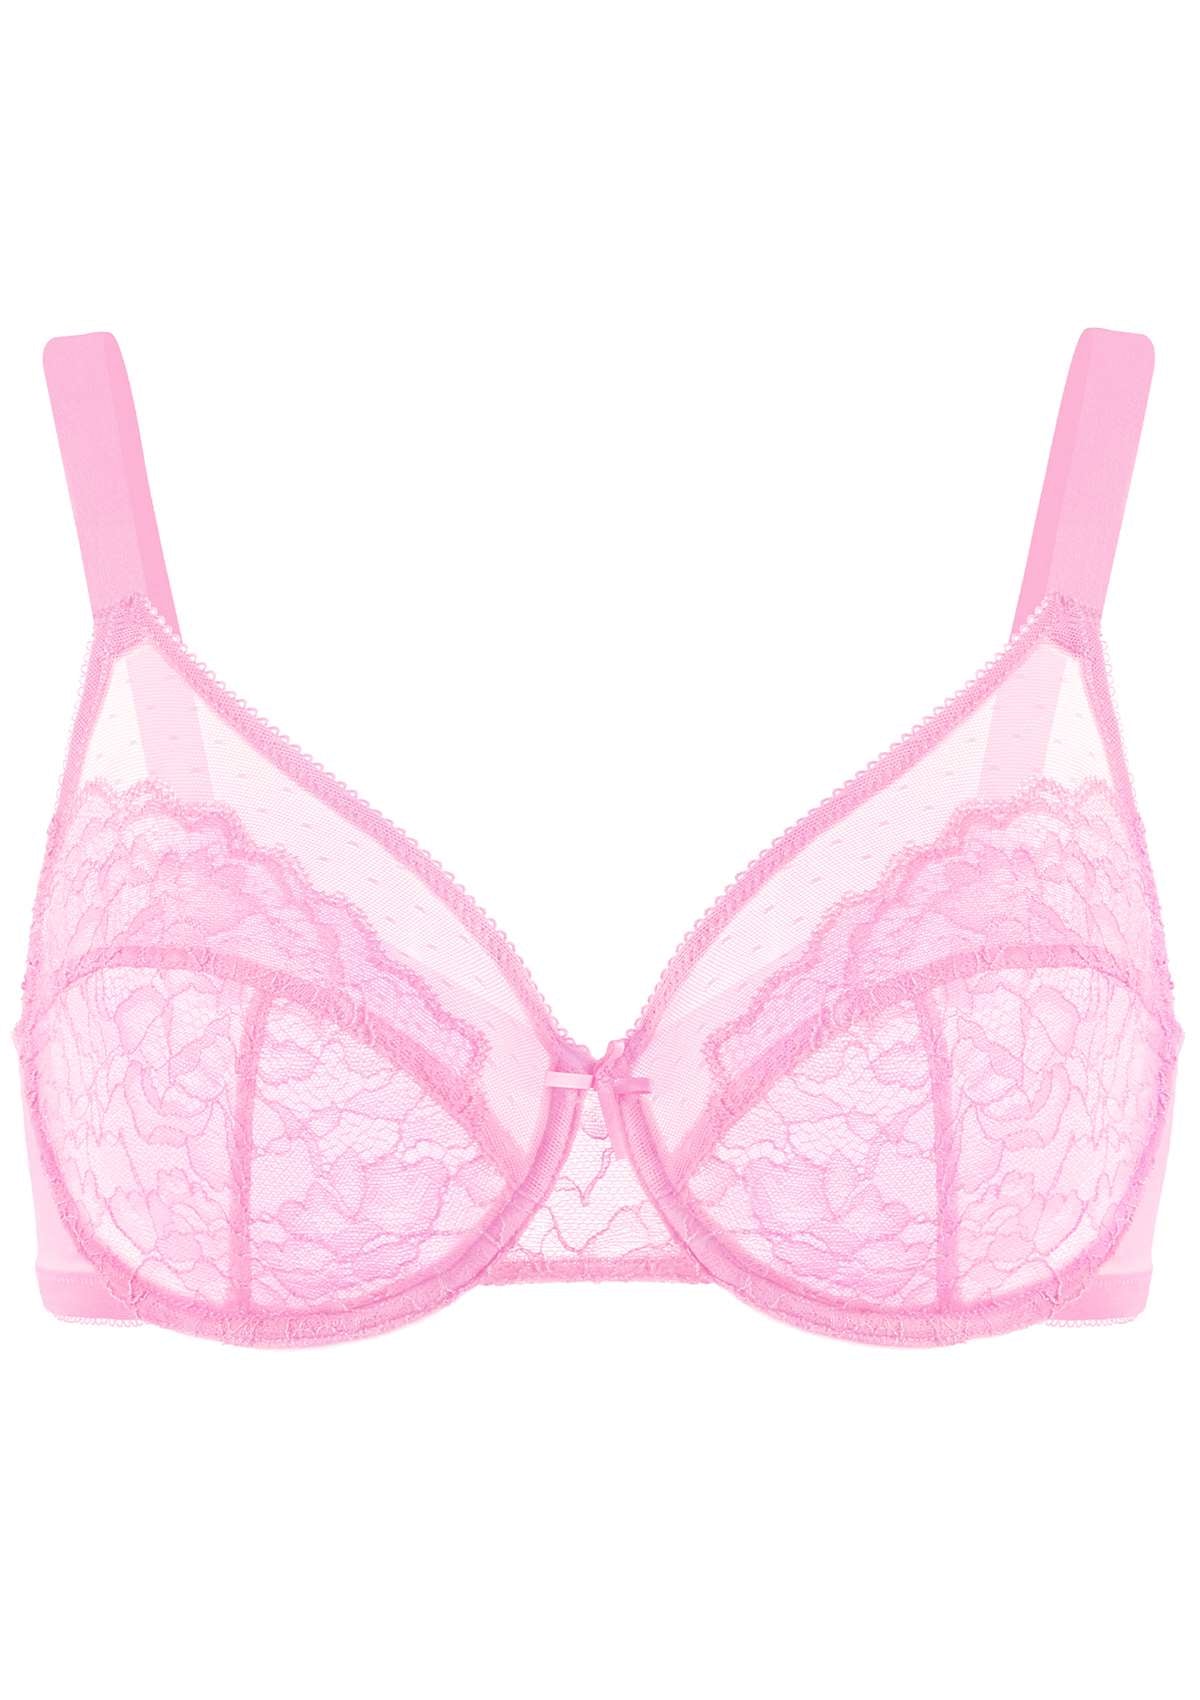 HSIA Enchante Lacy Bra: Comfy Sheer Lace Bra With Lift - Pink / 42 / D